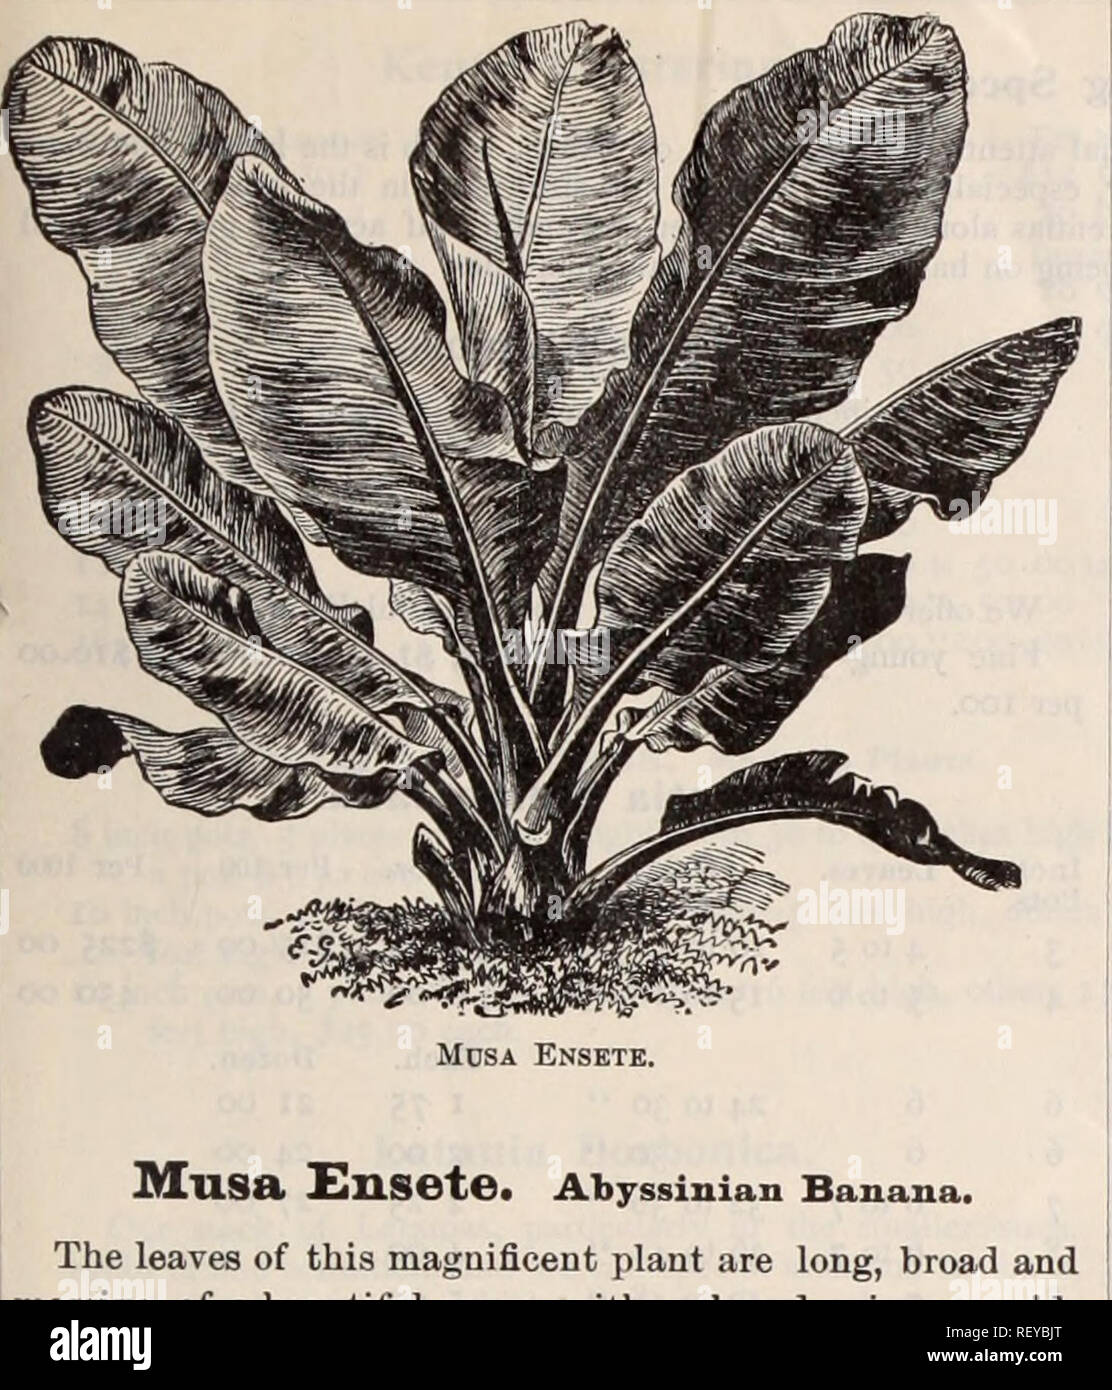 . Dreer's wholesale price list / Henry A. Dreer.. Nursery Catalogue. DREER'S WHOLESALE PRICE LIST. 39. MllSa £nsete. Abyssinian Banana. The leaves of this maguificent plant are long, broad and massive, of a beautiful green, with a broad crimson mid- rib ; the plant groves luxuriantly from 8 to 12 feet high, producing a tropical effect. Strong 5 inch pots, 50 cents each ; $5.00 per dozen, &quot; 3 &quot; 30 &quot; 3.00 &quot; Seven Grand Pelargoniums. (Lady Washington Geraniums.) The seven varieties listed below are the finest that have ever come to our notice. The plants are of strong, vigor-  Stock Photo